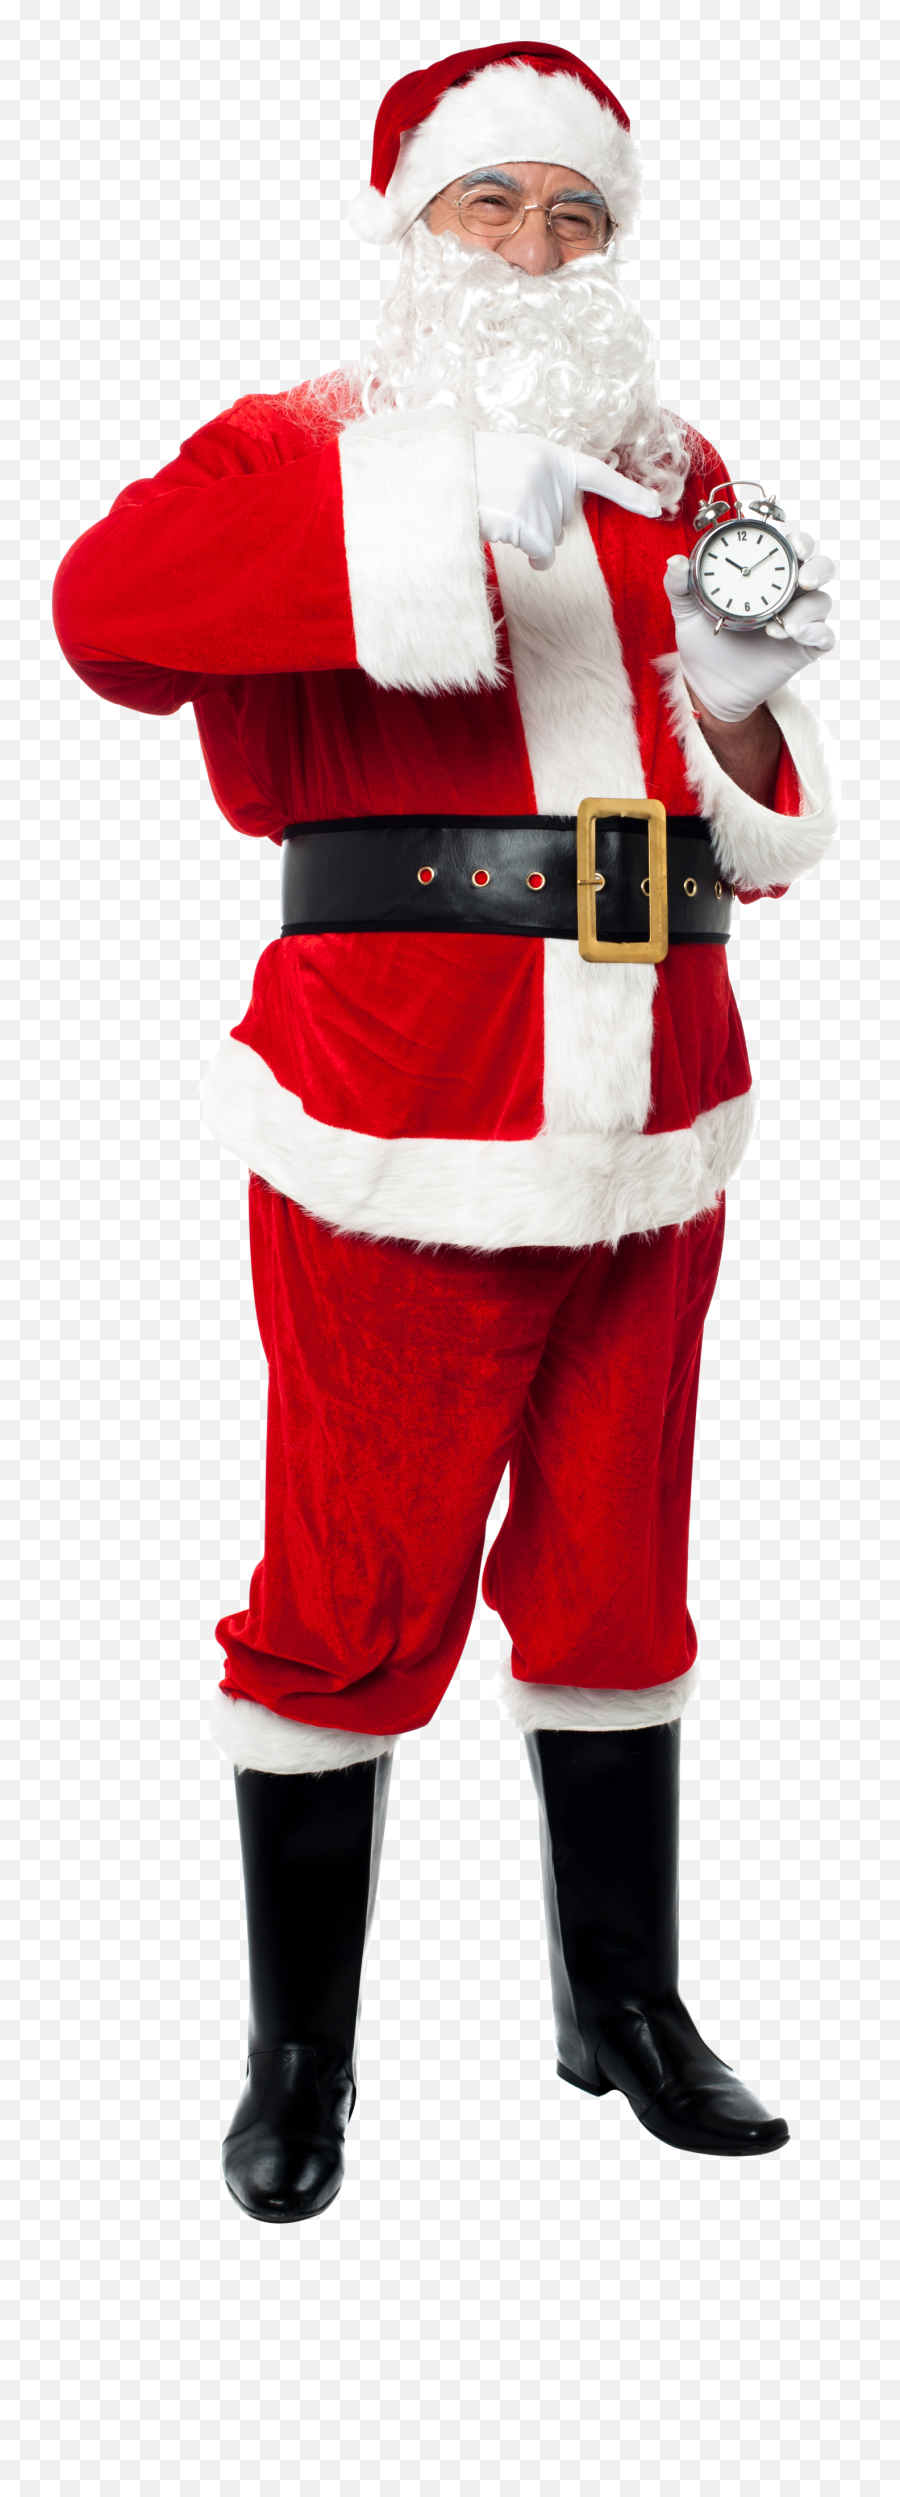 Download Santa Claus Png Image For Free - Real Transparent Santa Claus Png,Santa Png